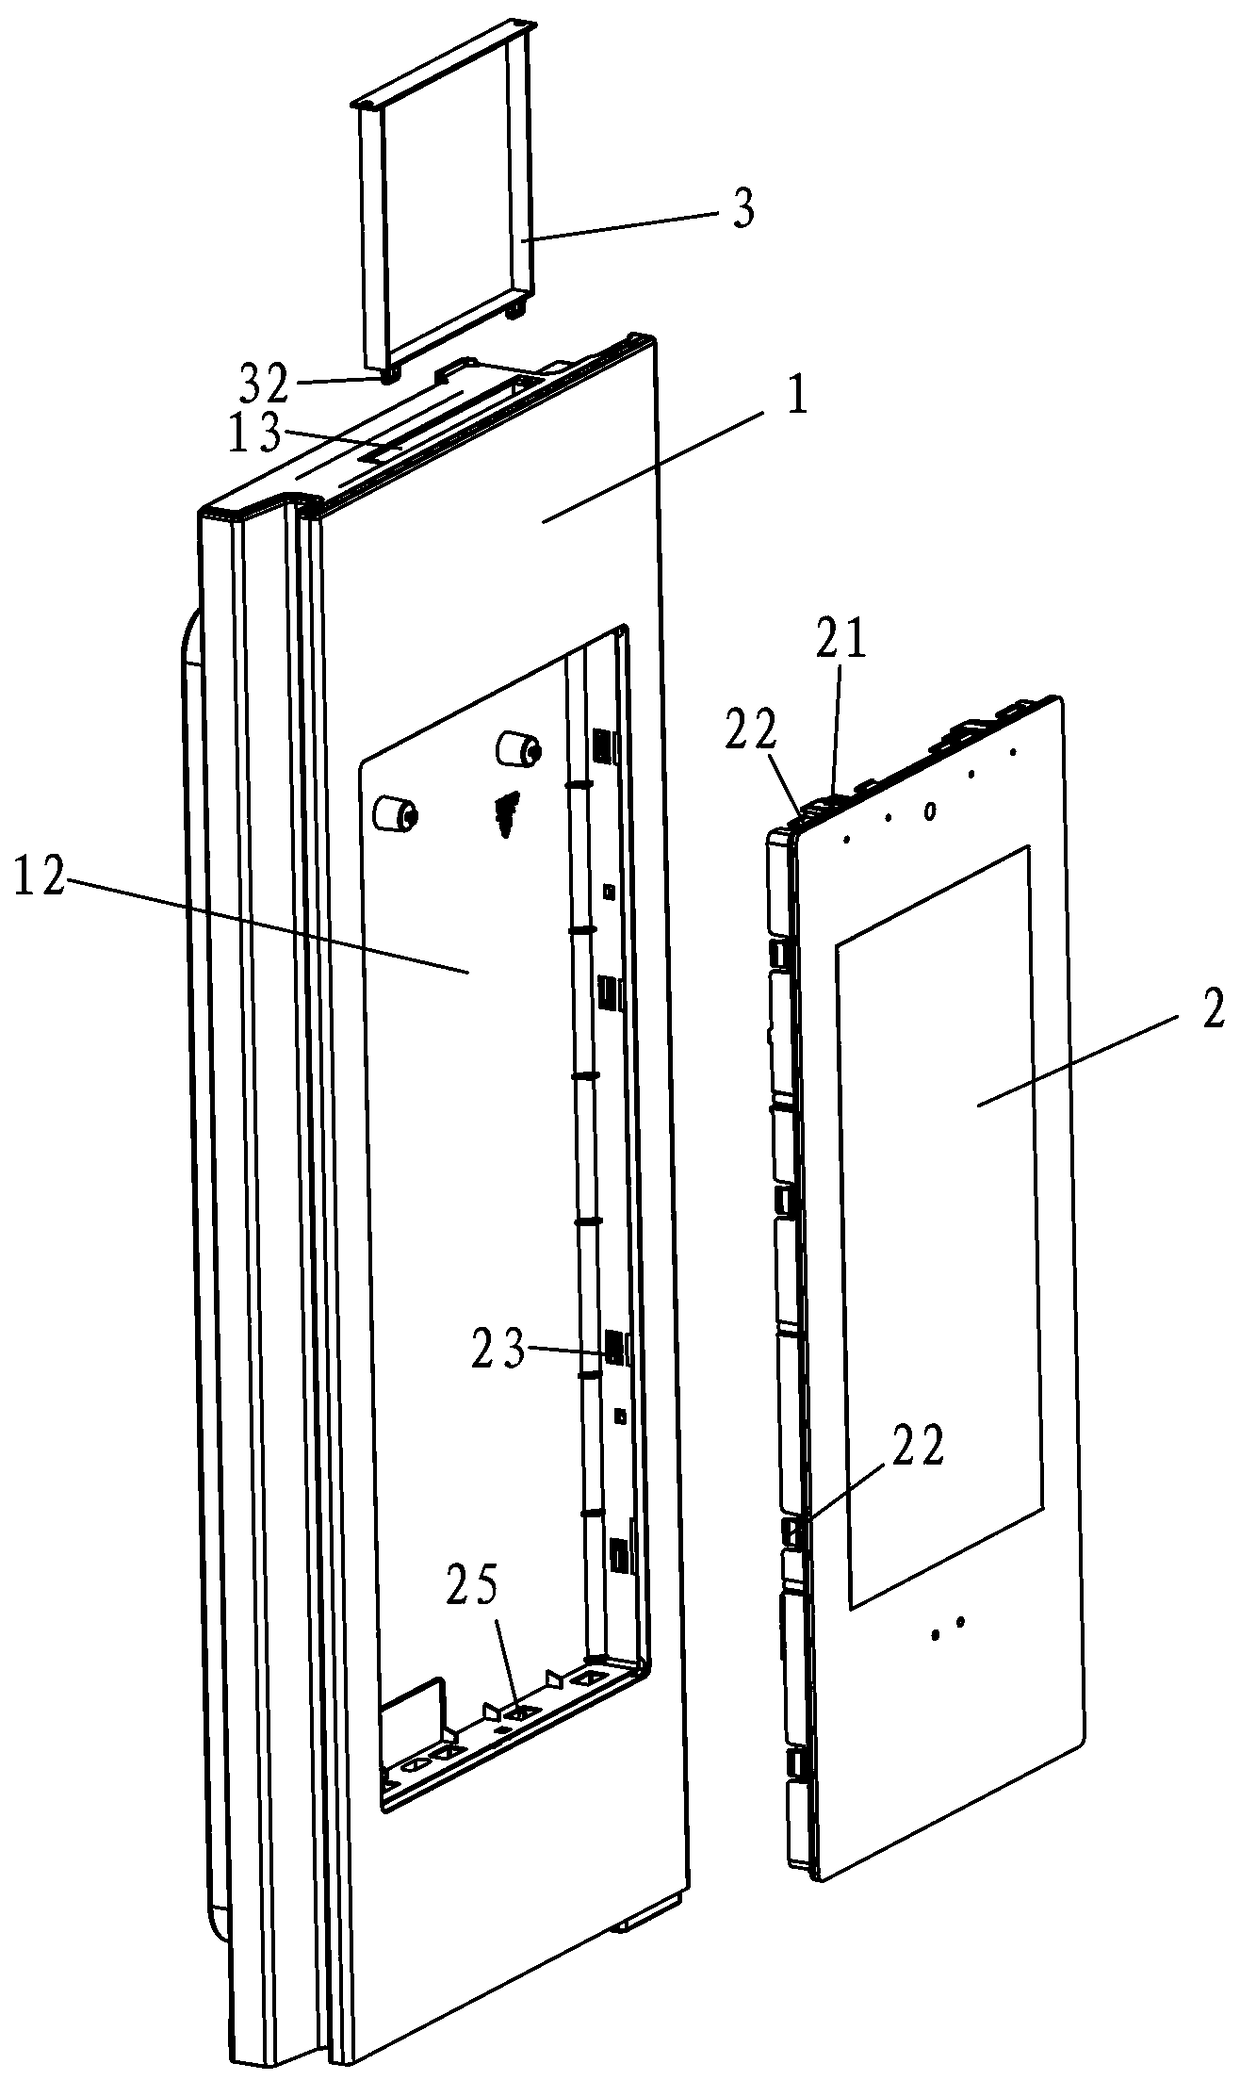 Display screen installation structure for household electrical appliance